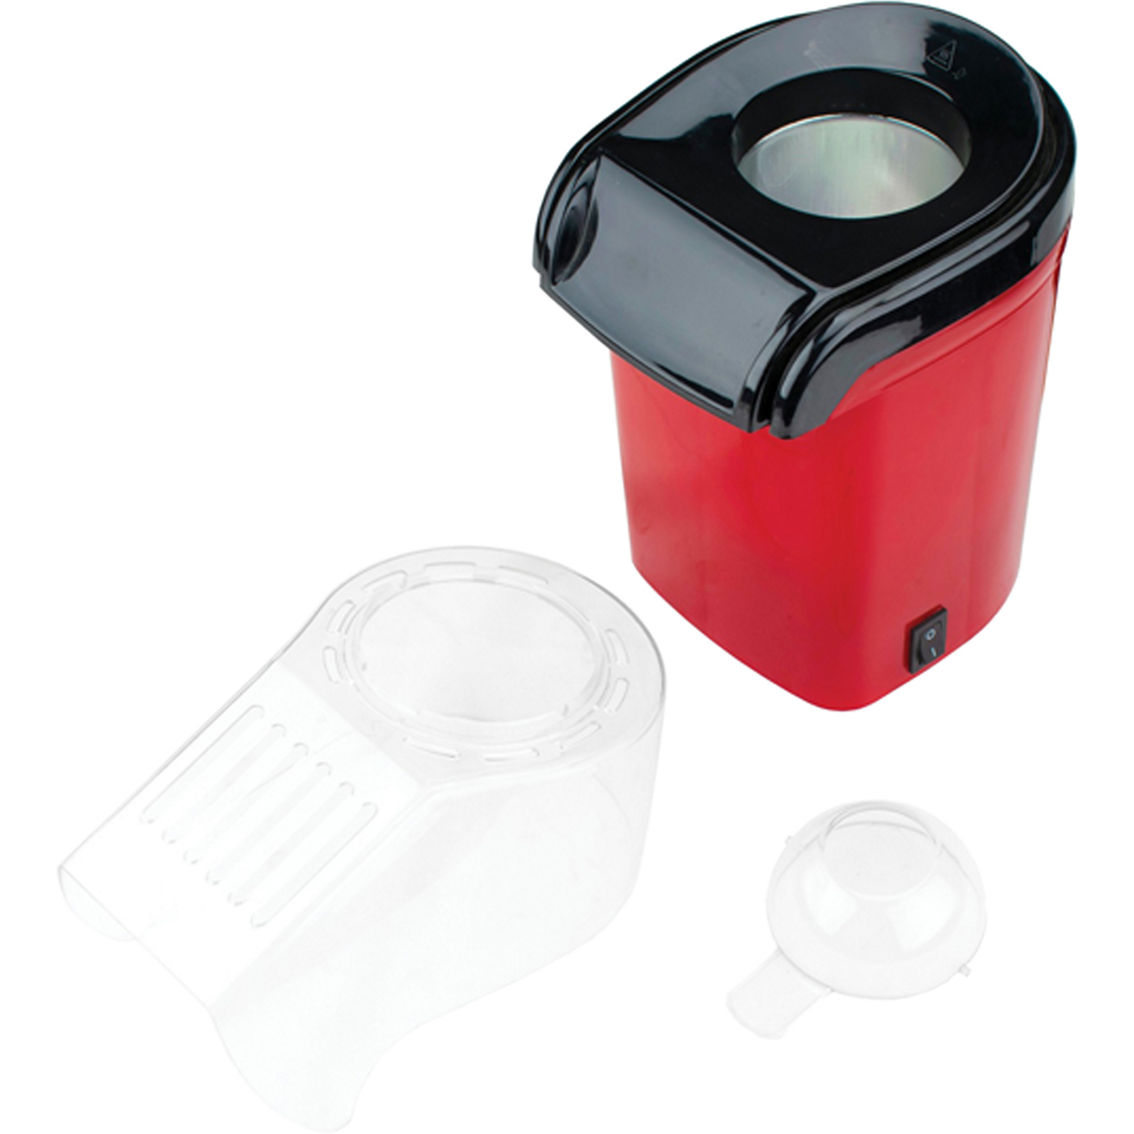 Brentwood 8 Cup Red Hot Air Popcorn Maker - Image 6 of 6